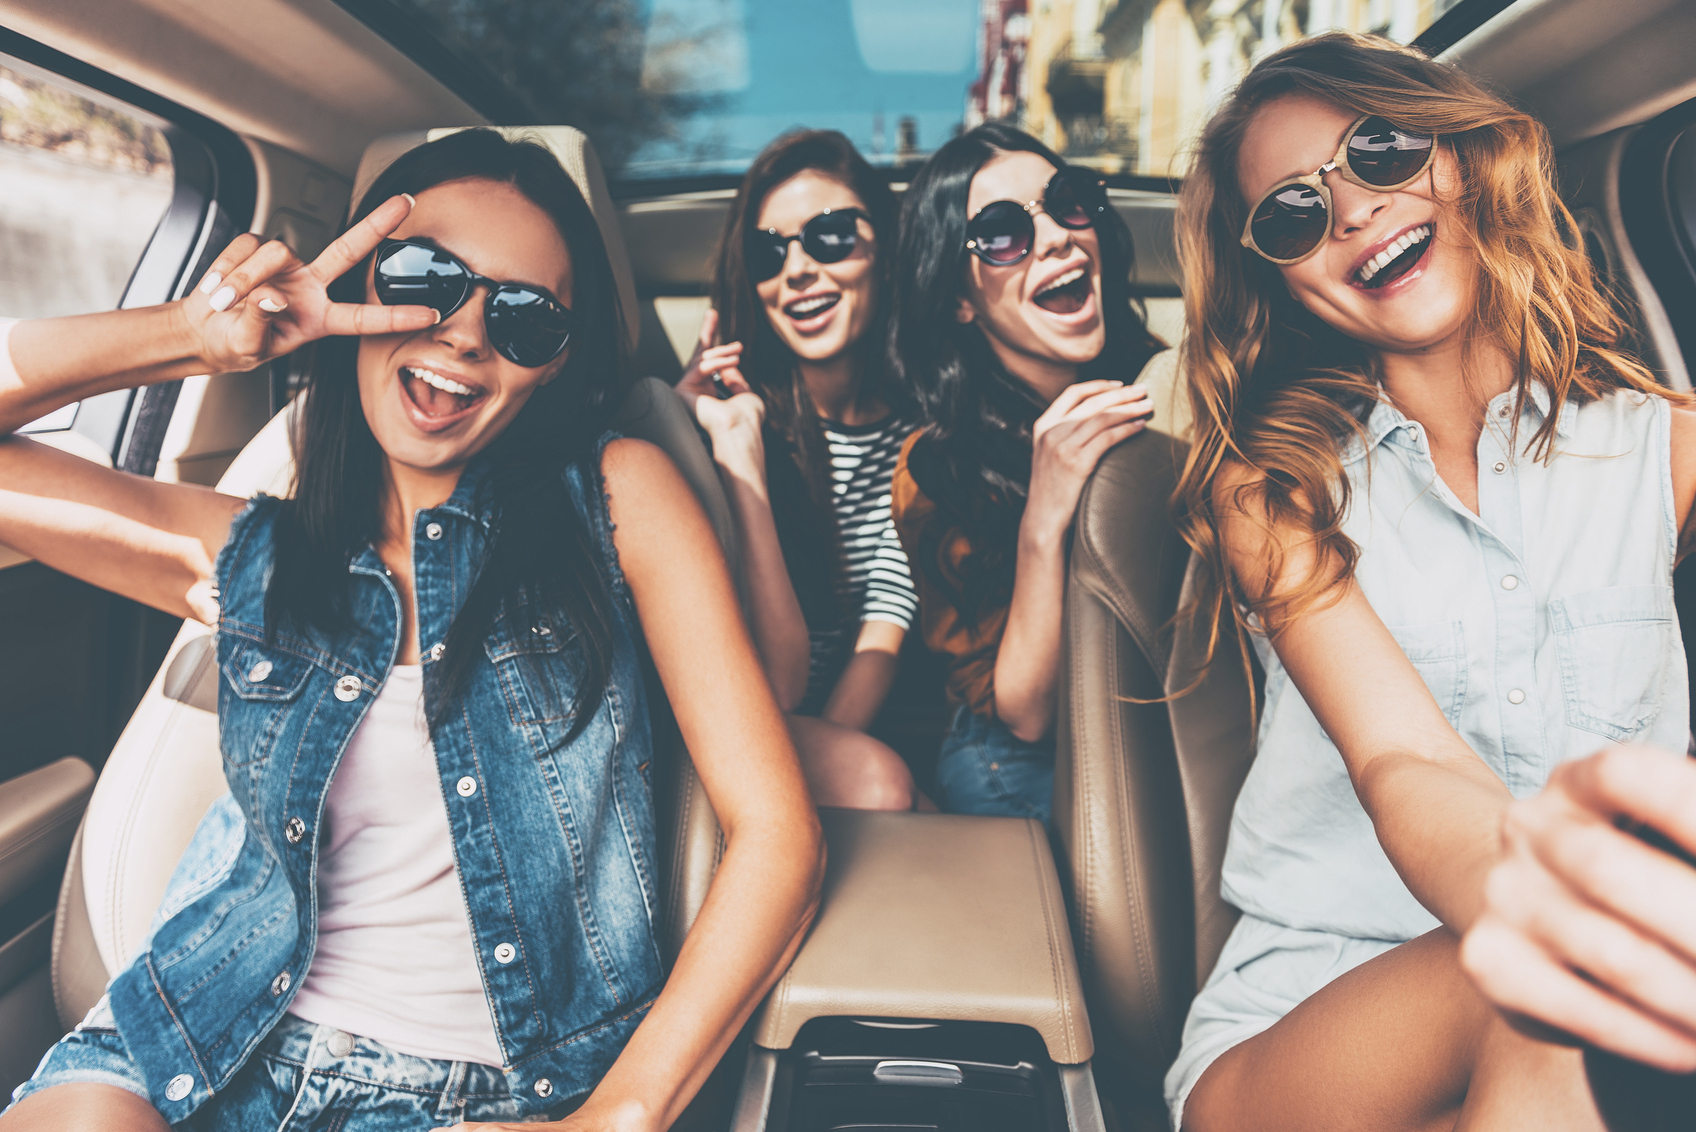 10 Fun Things to Do With Your Friends on Friendship Day